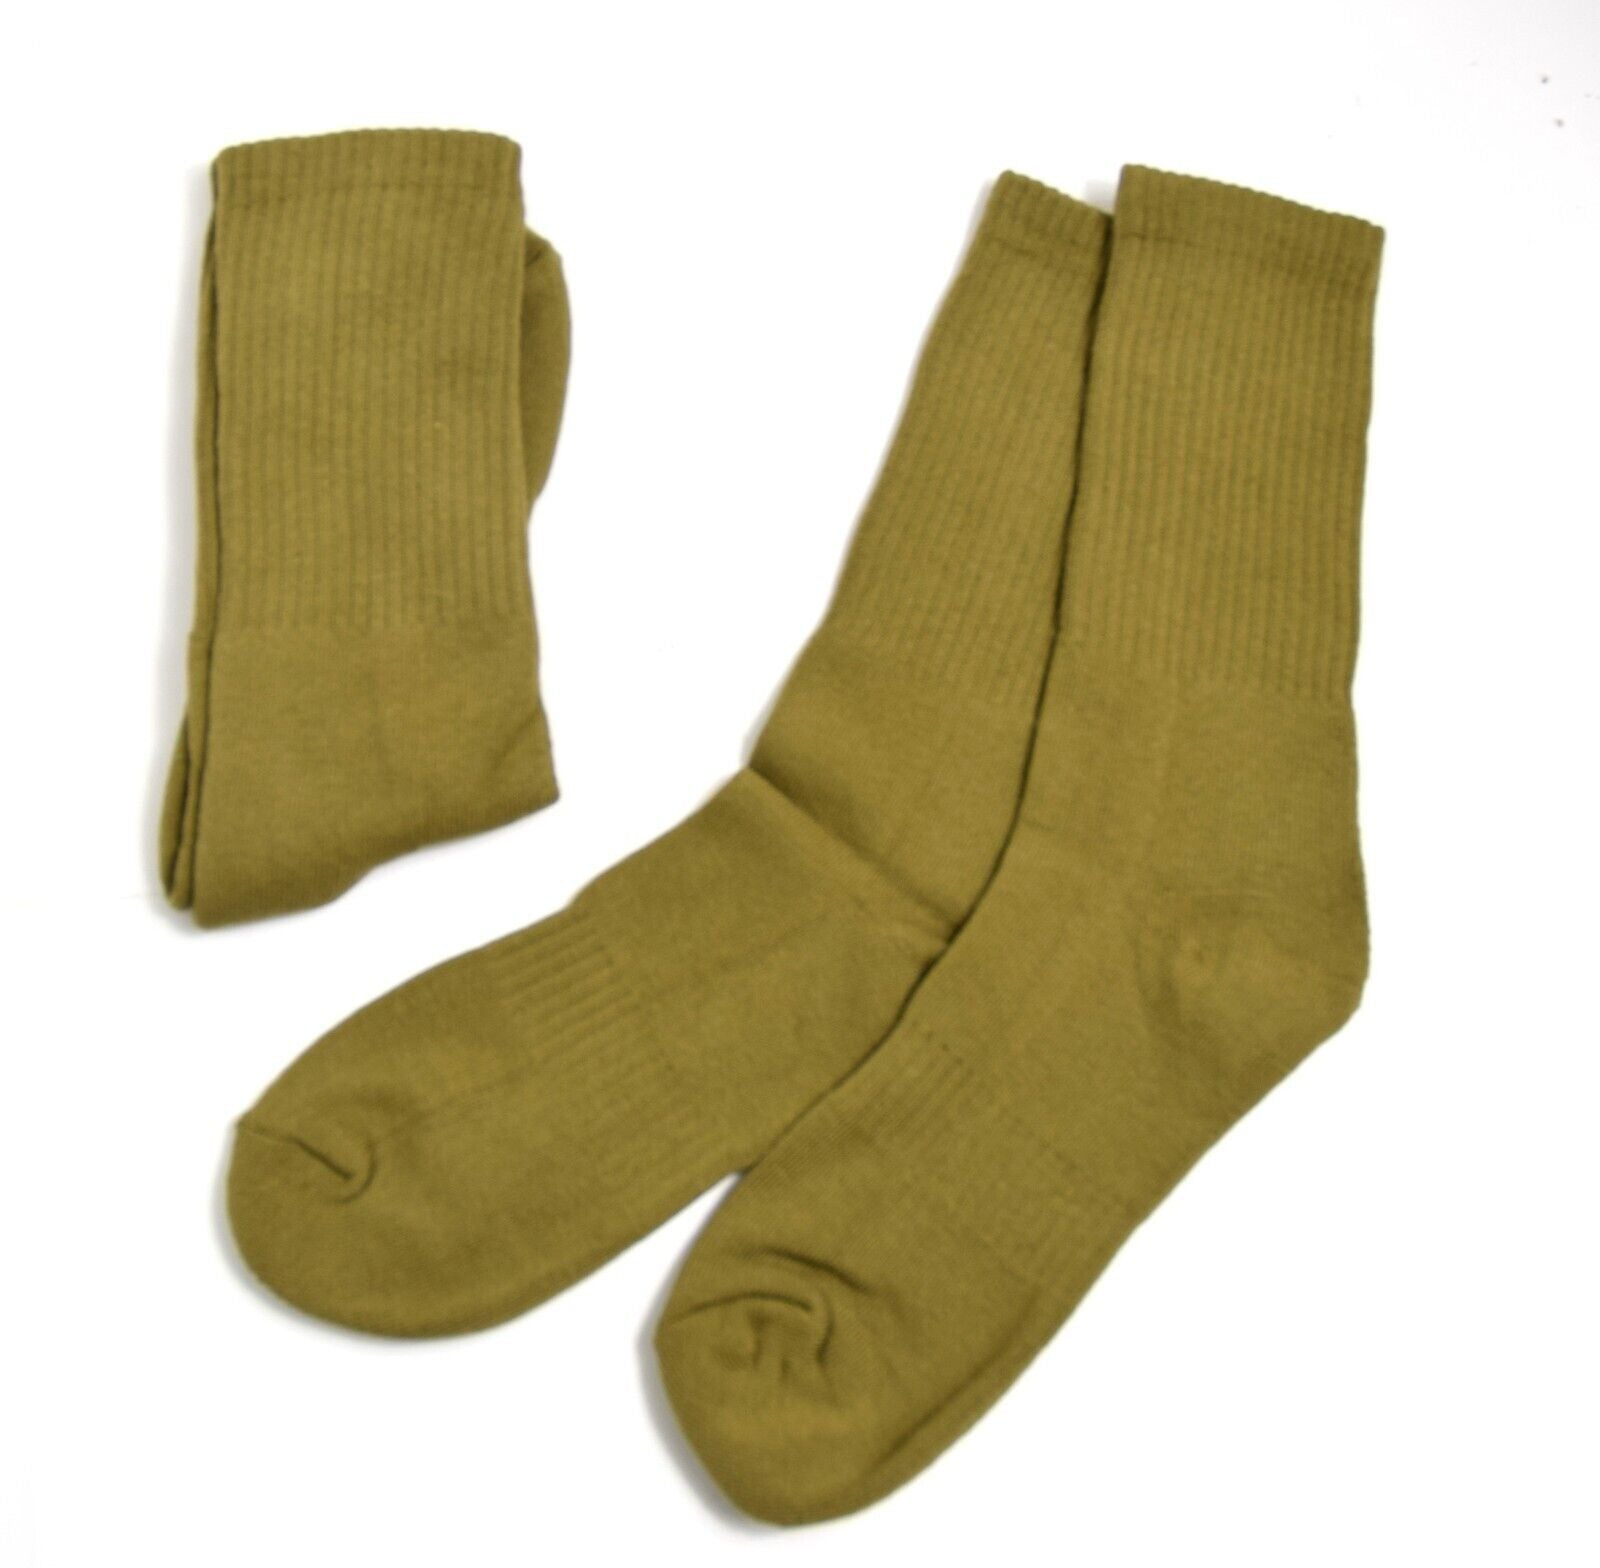 5 x Pairs US Army Khaki Mustard Socks NEW OLD STOCK OD Olive General Issue NEW